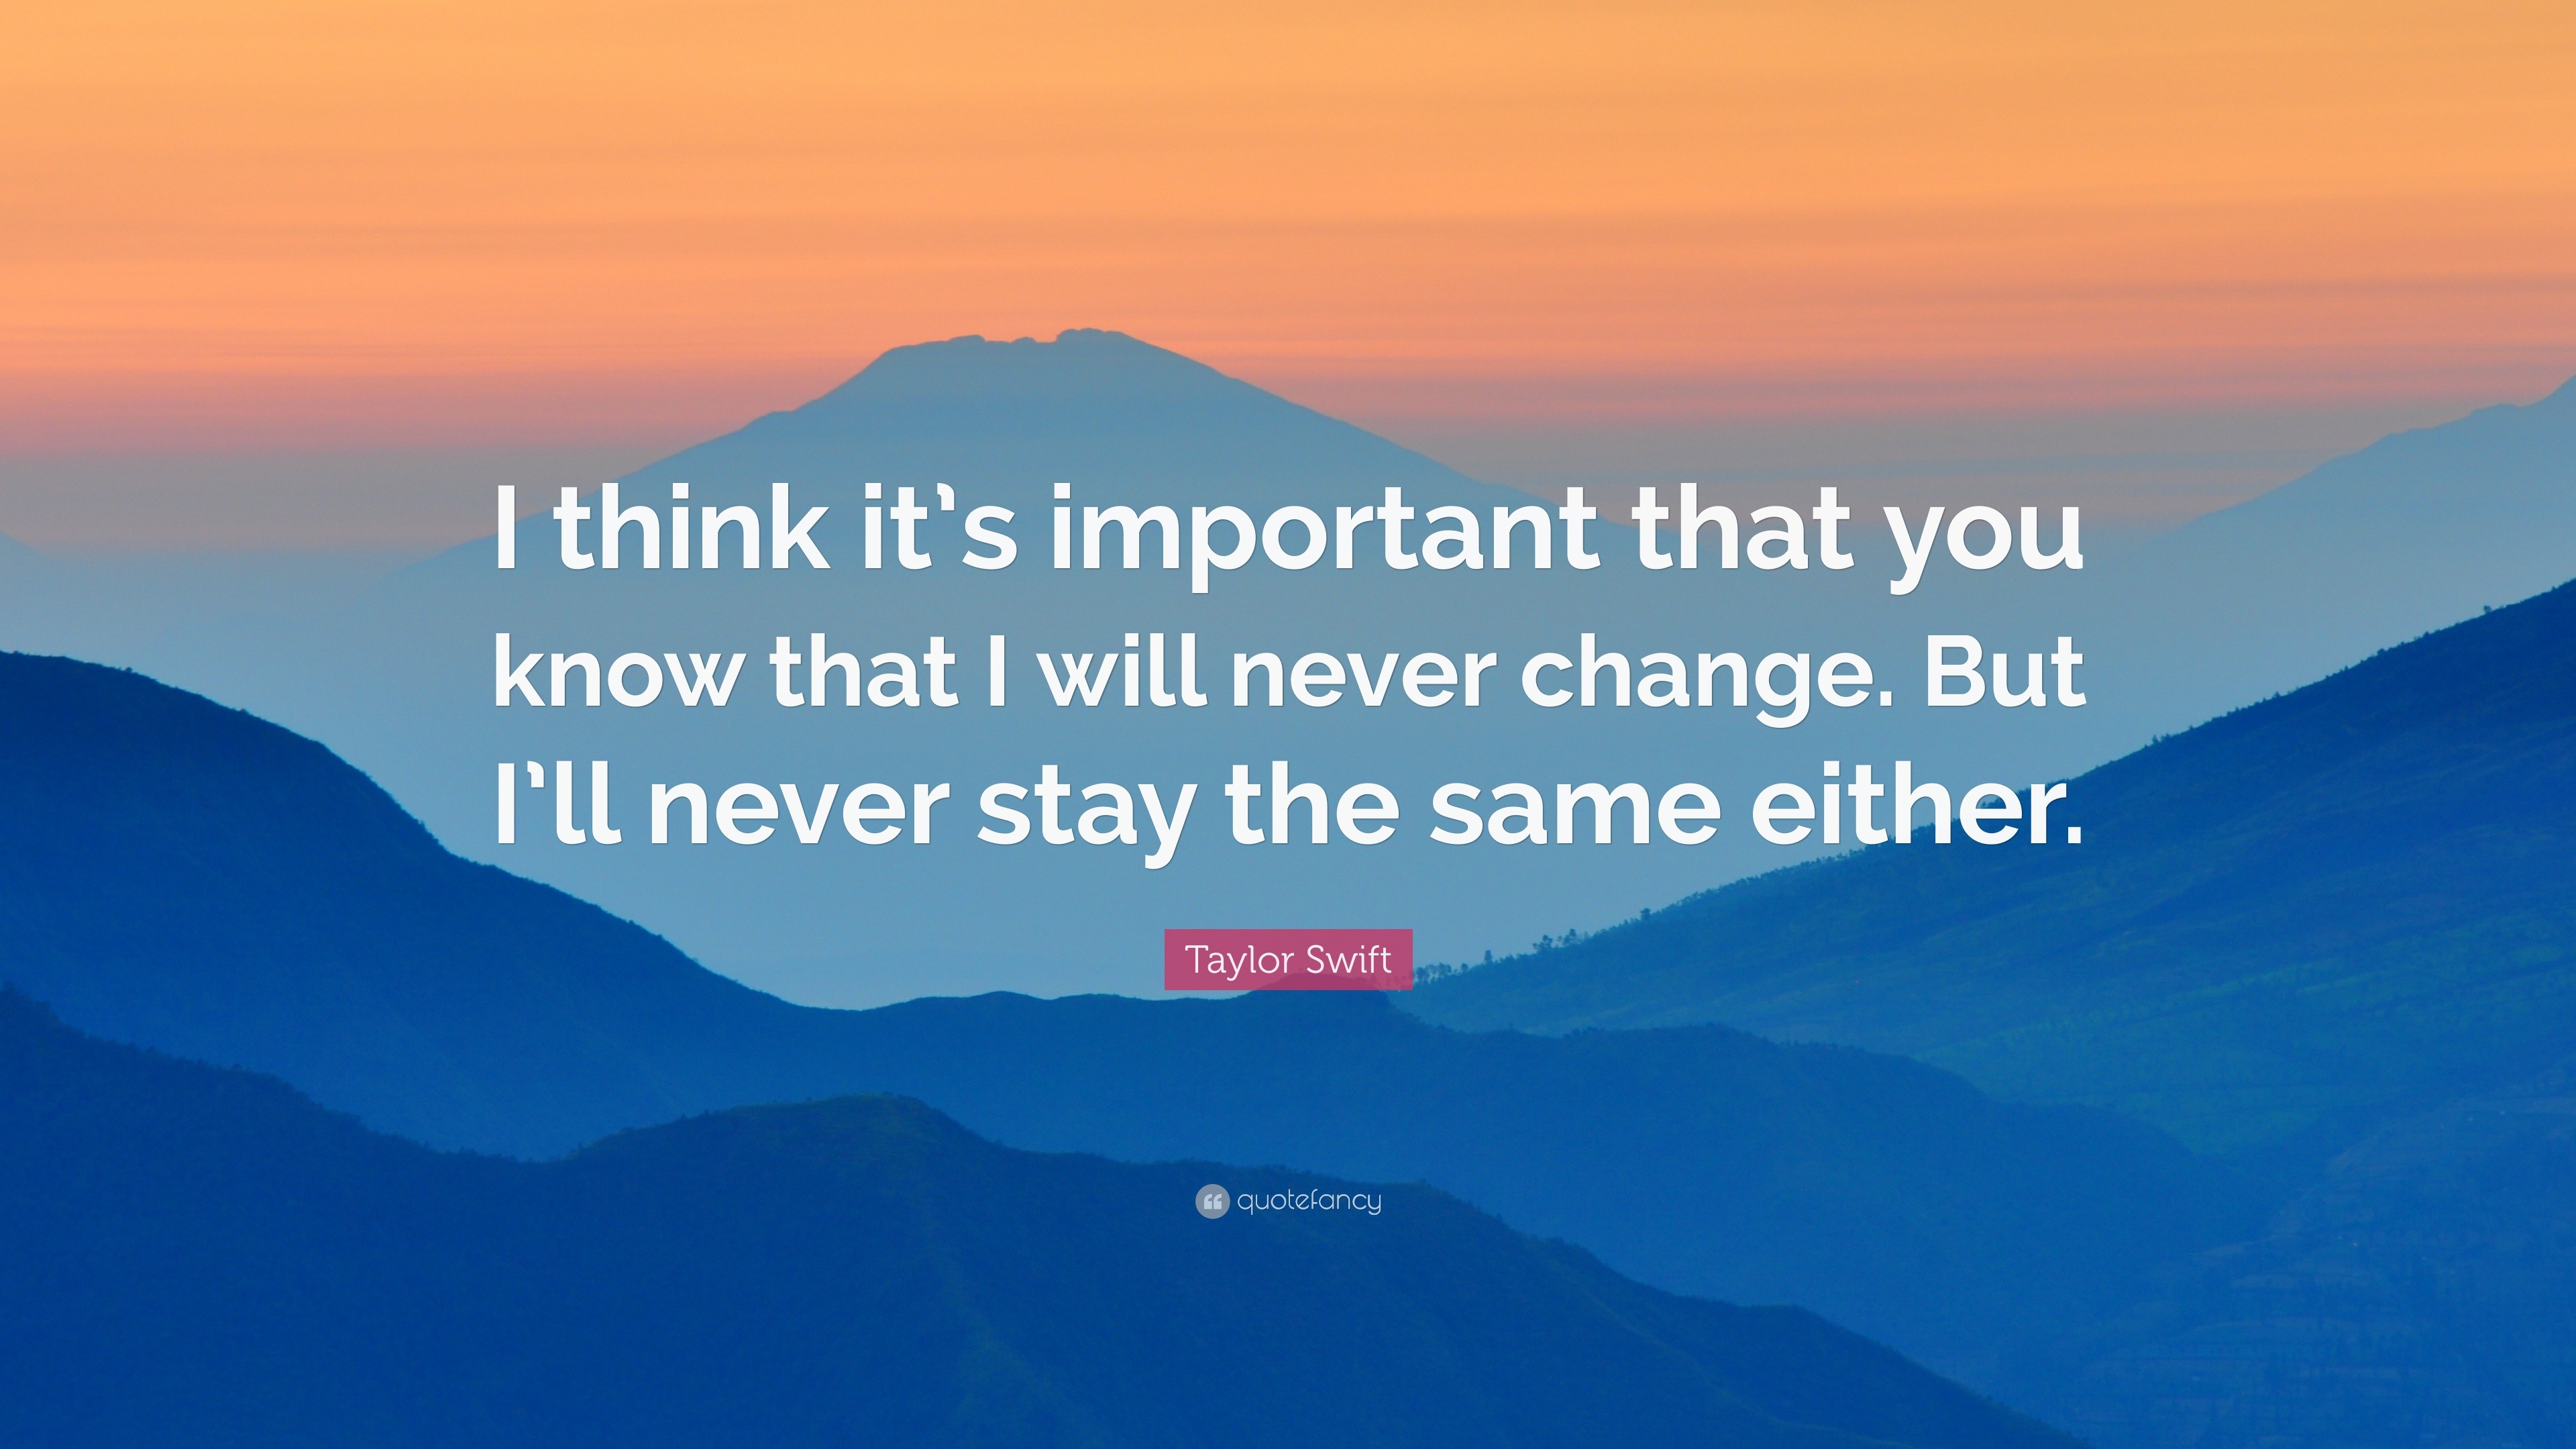 Taylor Swift Quote I Think It S Important That You Know That I Will Never Change But